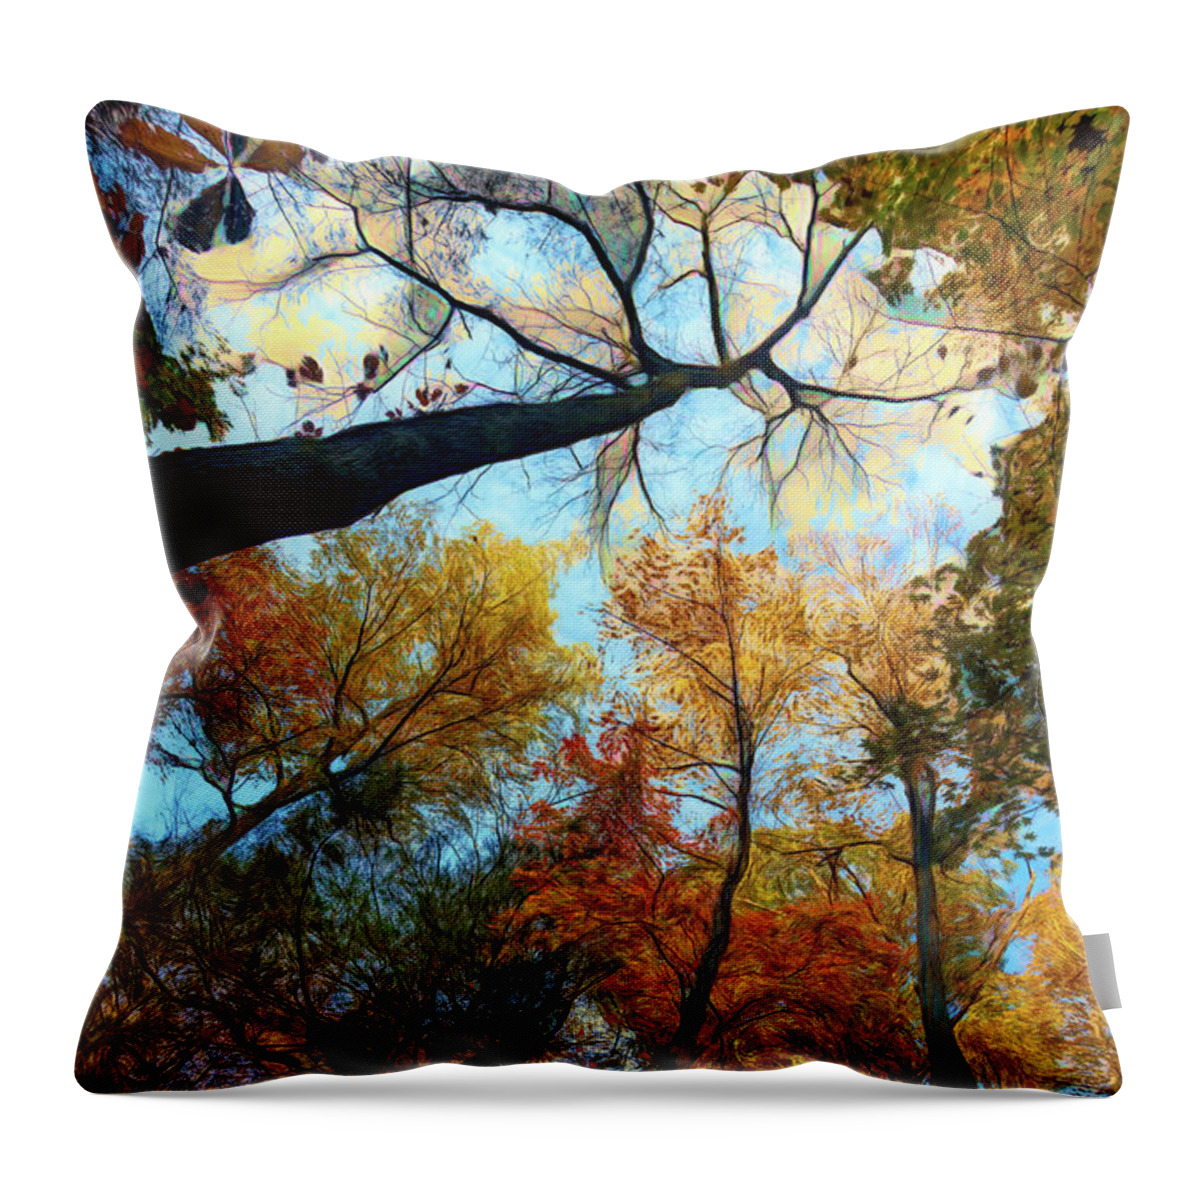 Clouds Throw Pillow featuring the photograph The Forest's Embrace Painting by Debra and Dave Vanderlaan